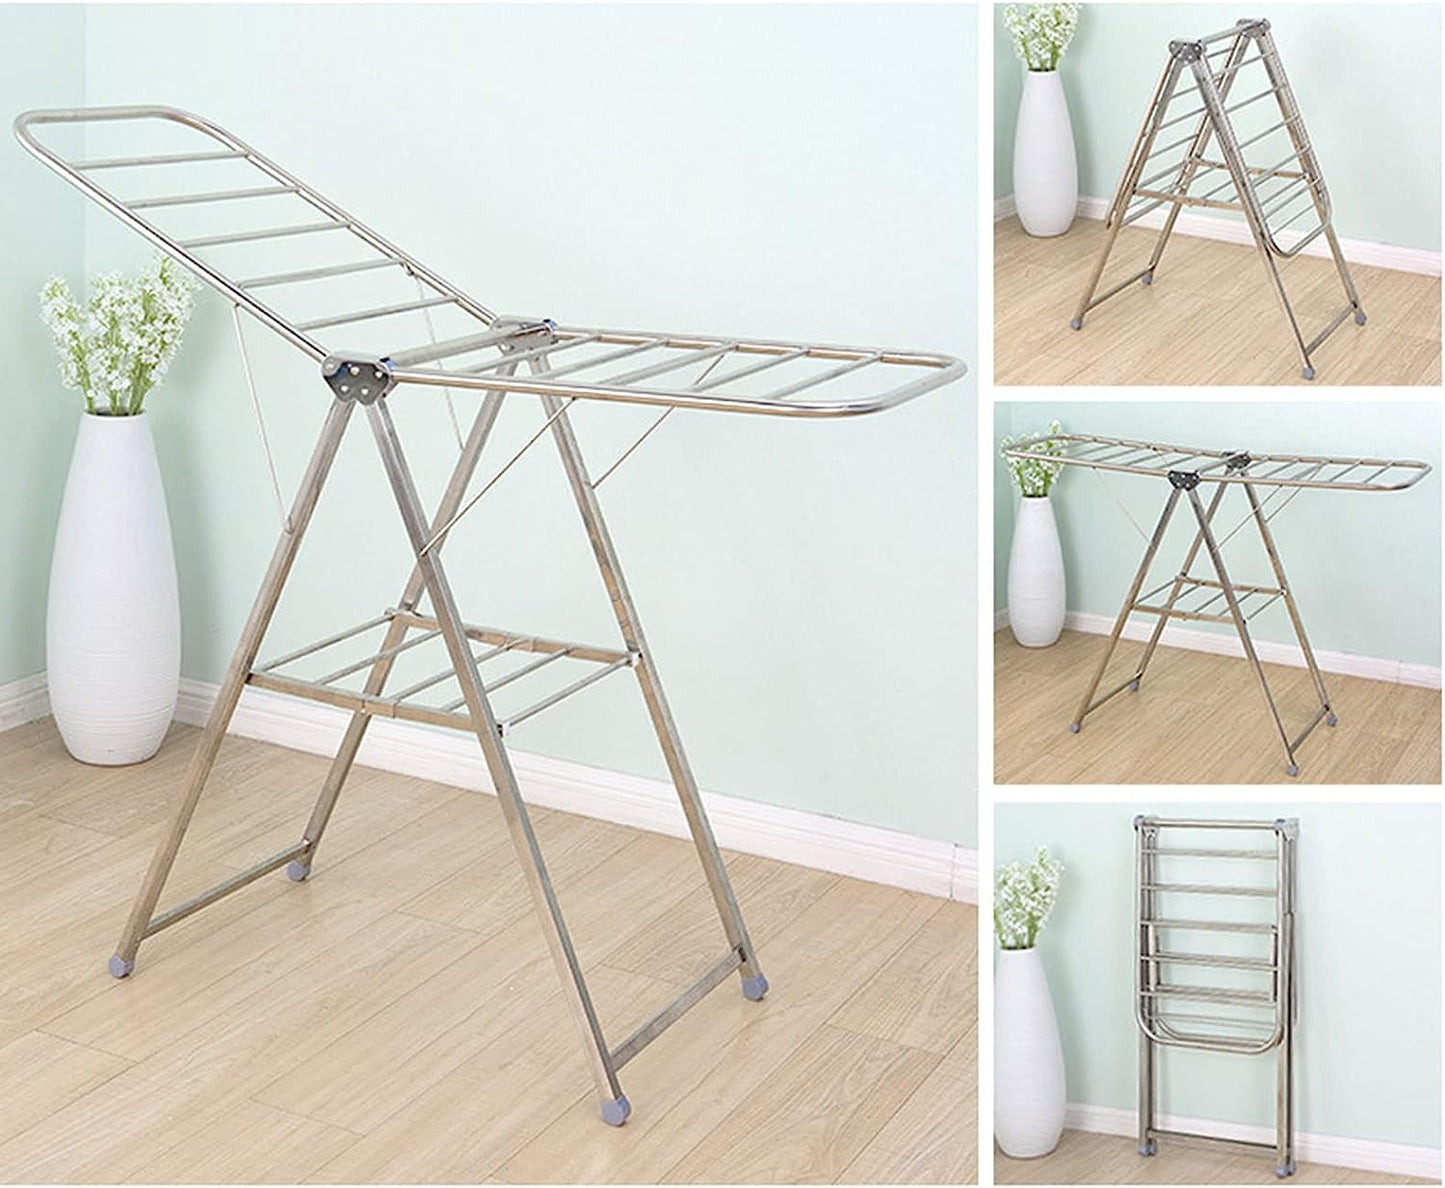 Clothes Foldable, Laundry Drying Rack for Indoor Outdoor